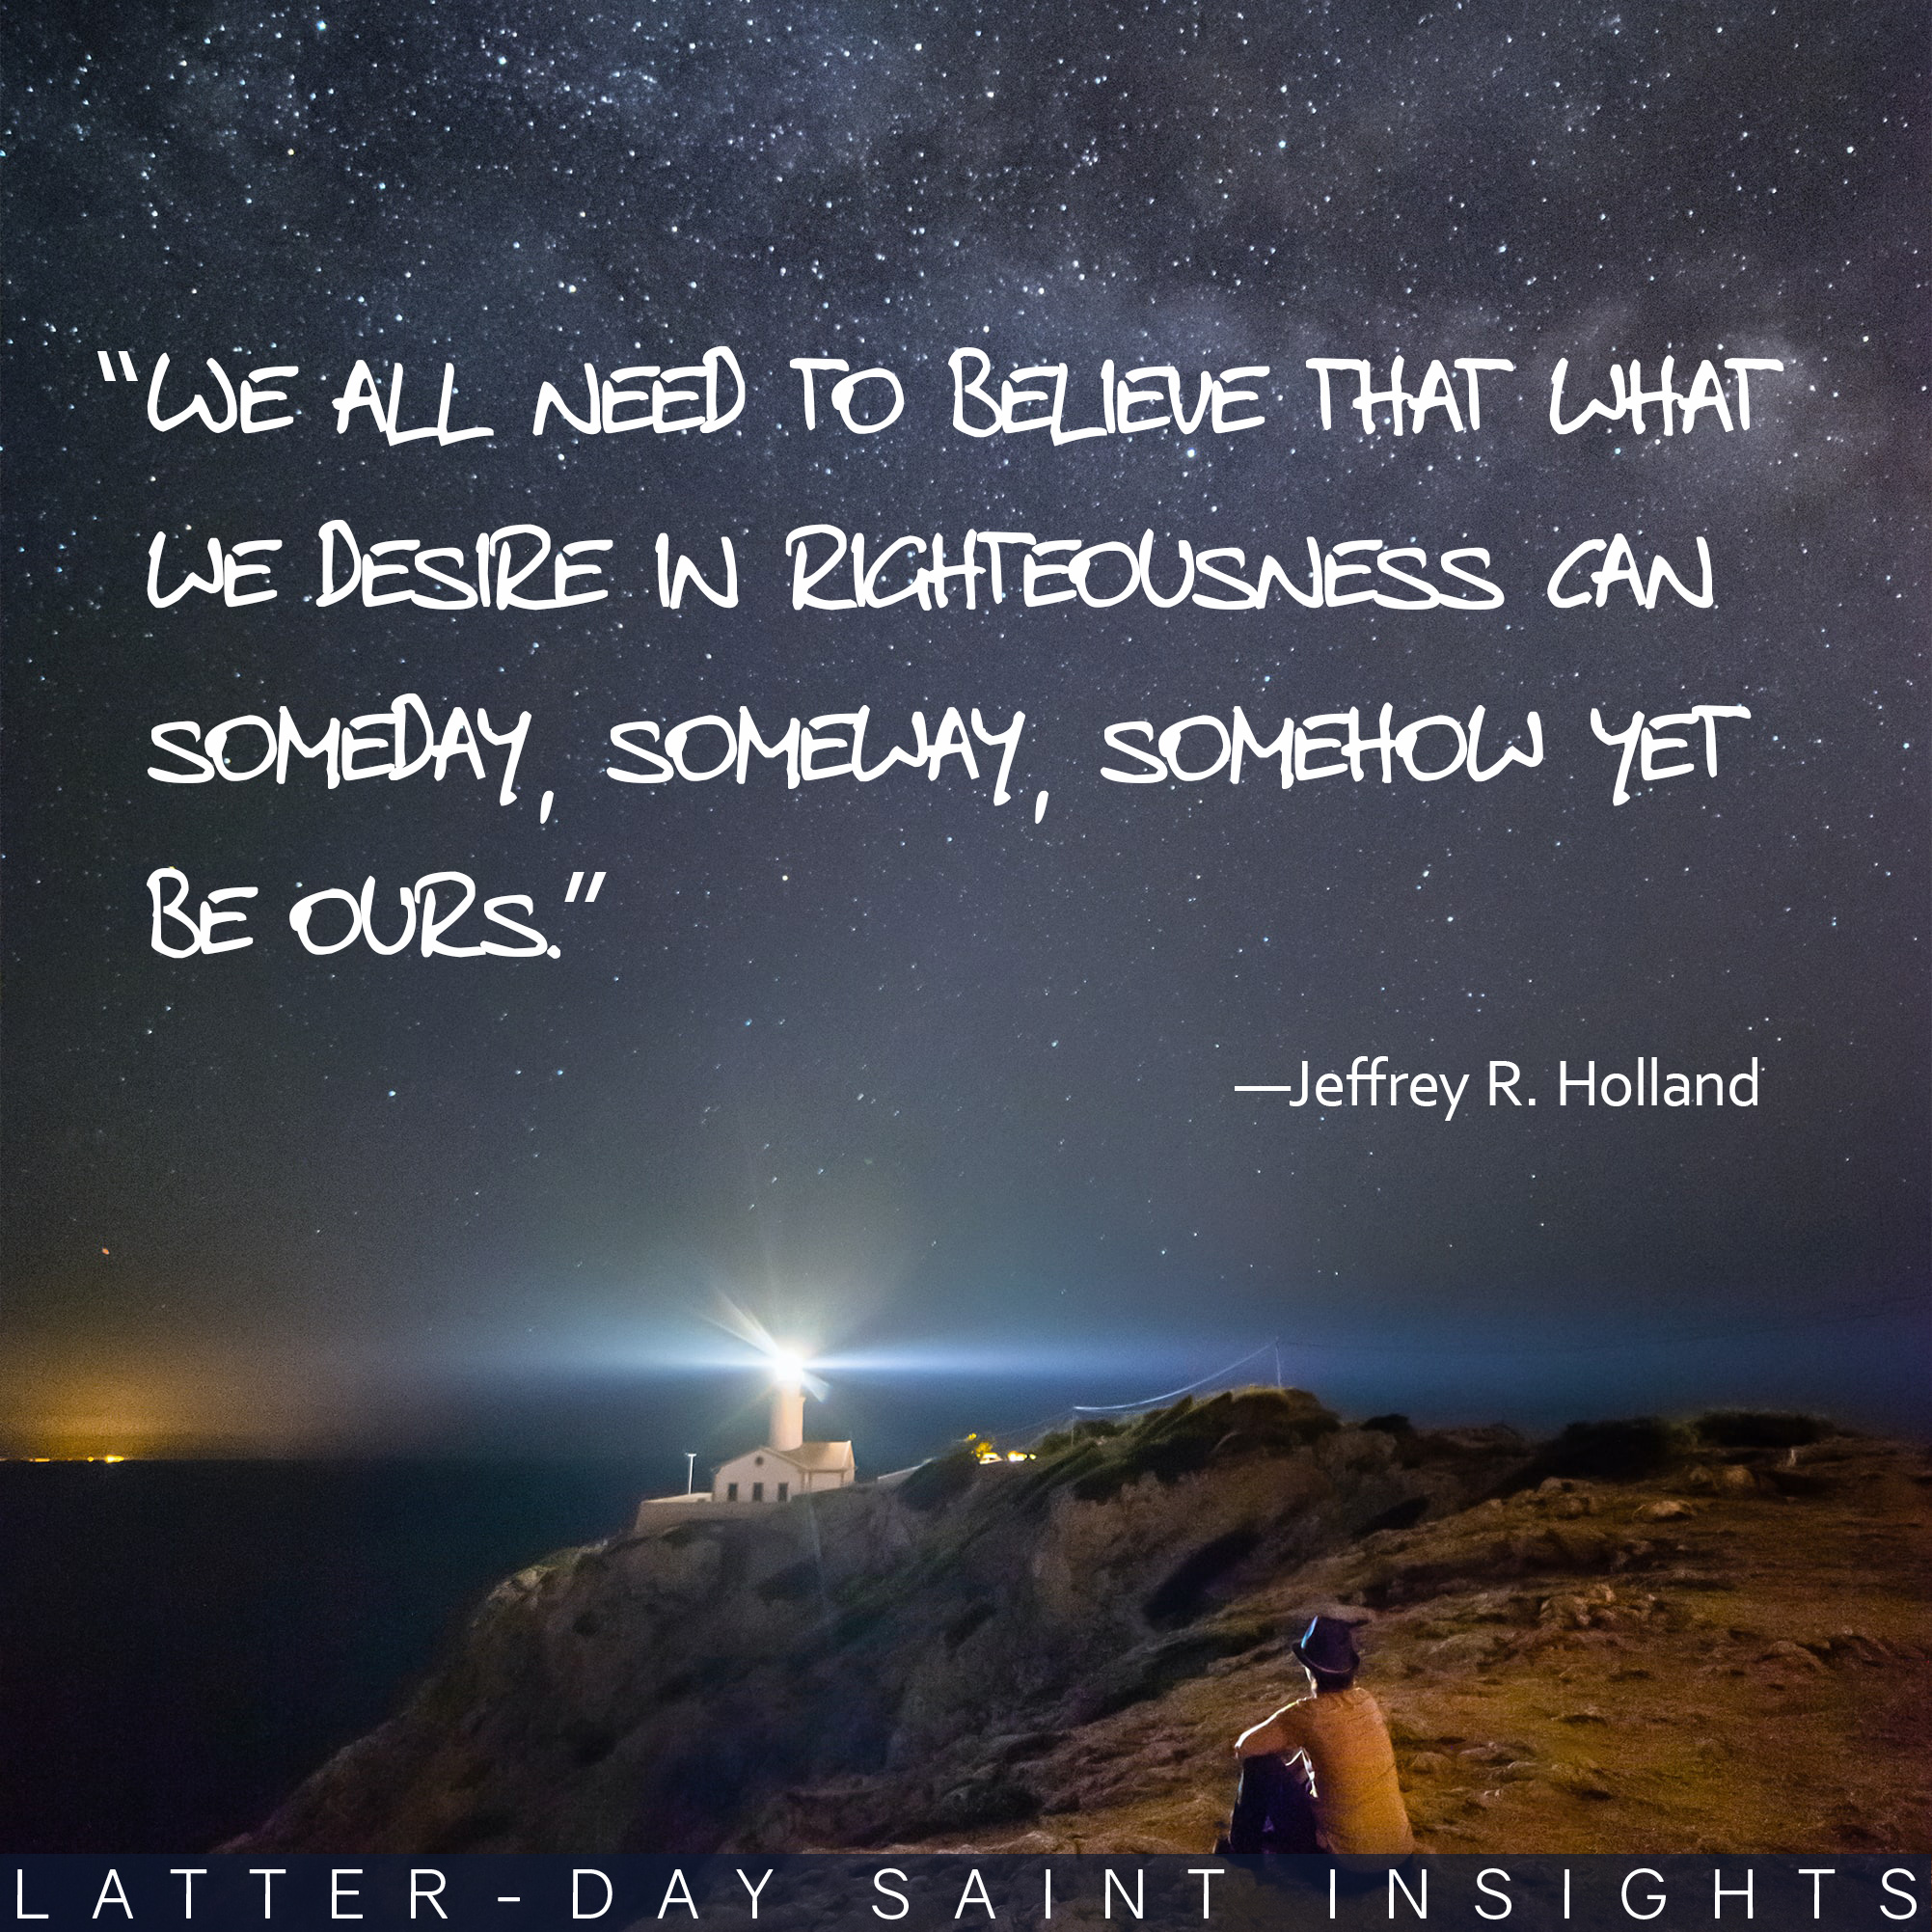 Person sitting by a cliff under starry night with a quote by Jeffrey R. Holland that says, "We all need to believe that what we desire in righteousness can someday, someway, somehow yet be ours."